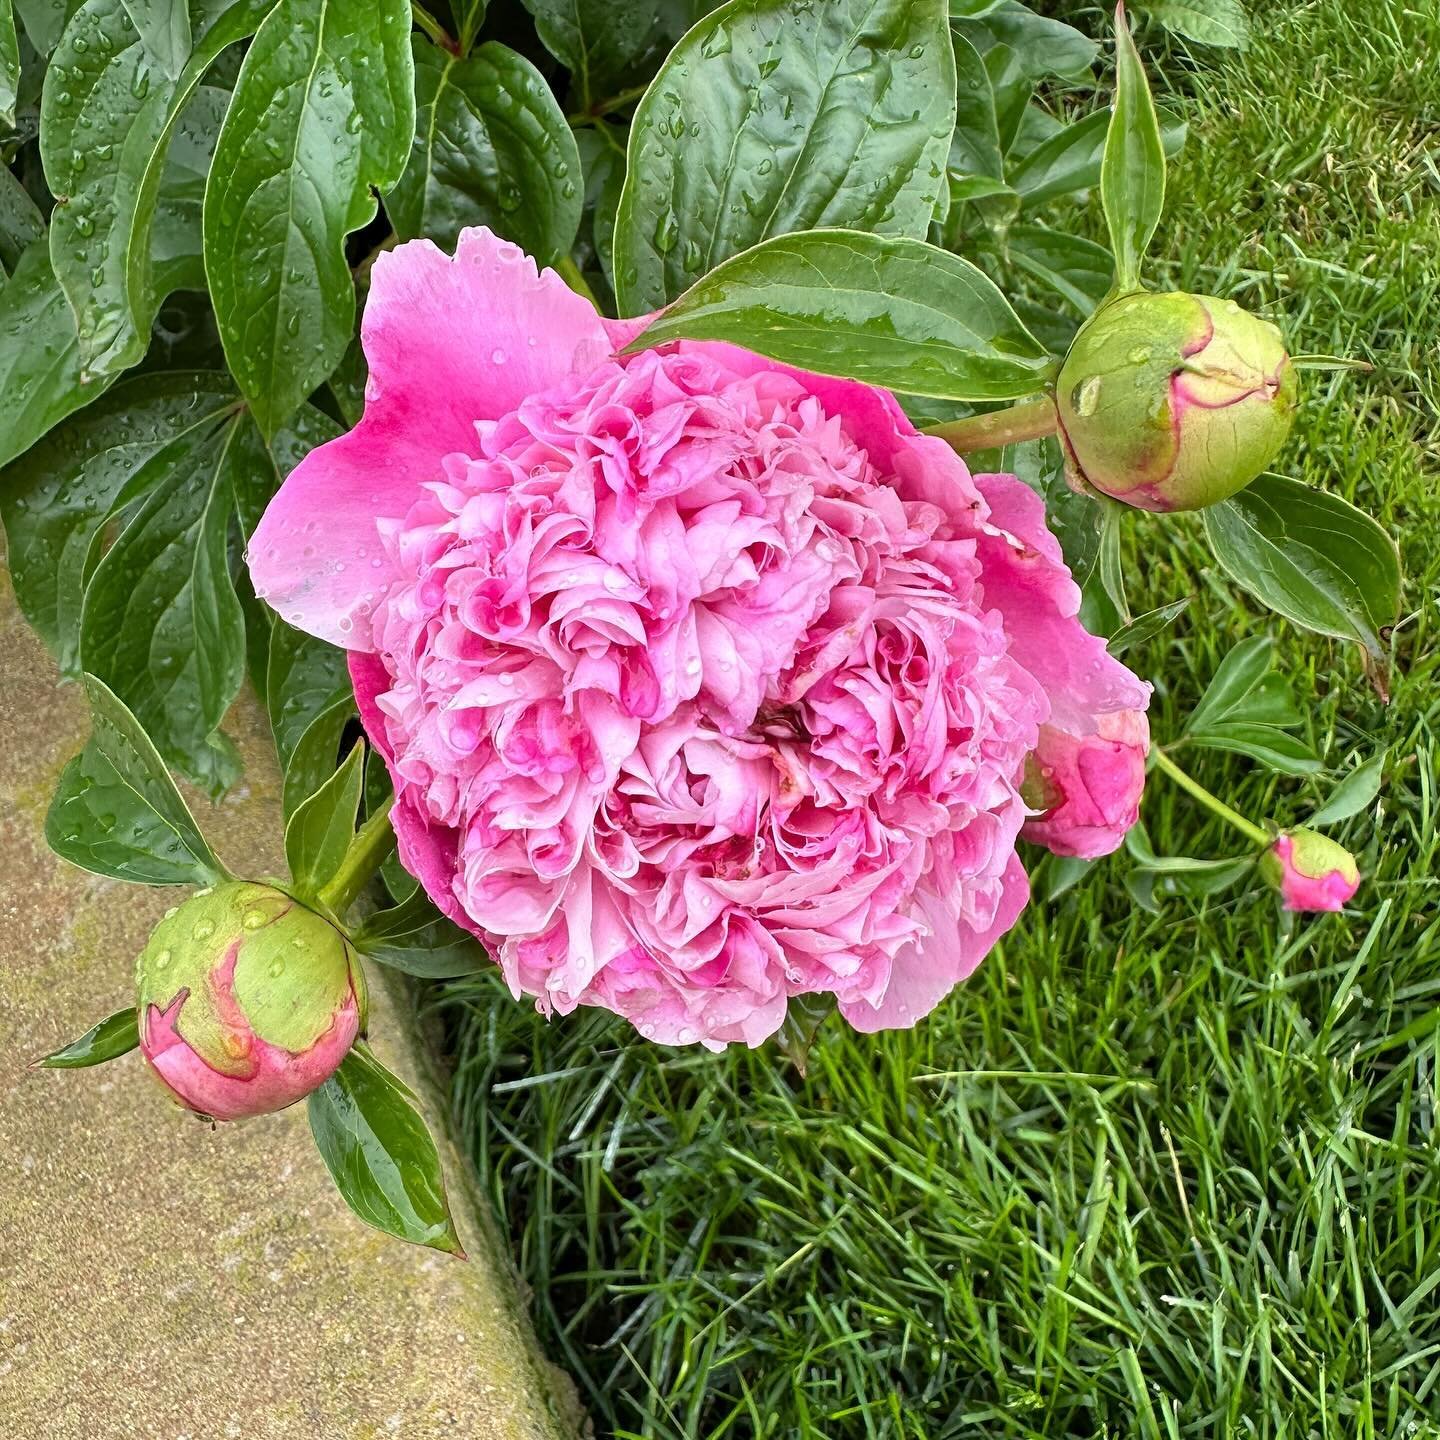 THE PEONIES ARE HERE. My favorite time of the year. Seems a little early but I can&rsquo;t complain peonies are my favorite flowers. #pinkpeonies #peonies #pink #rain #aprilshowersmayflowers